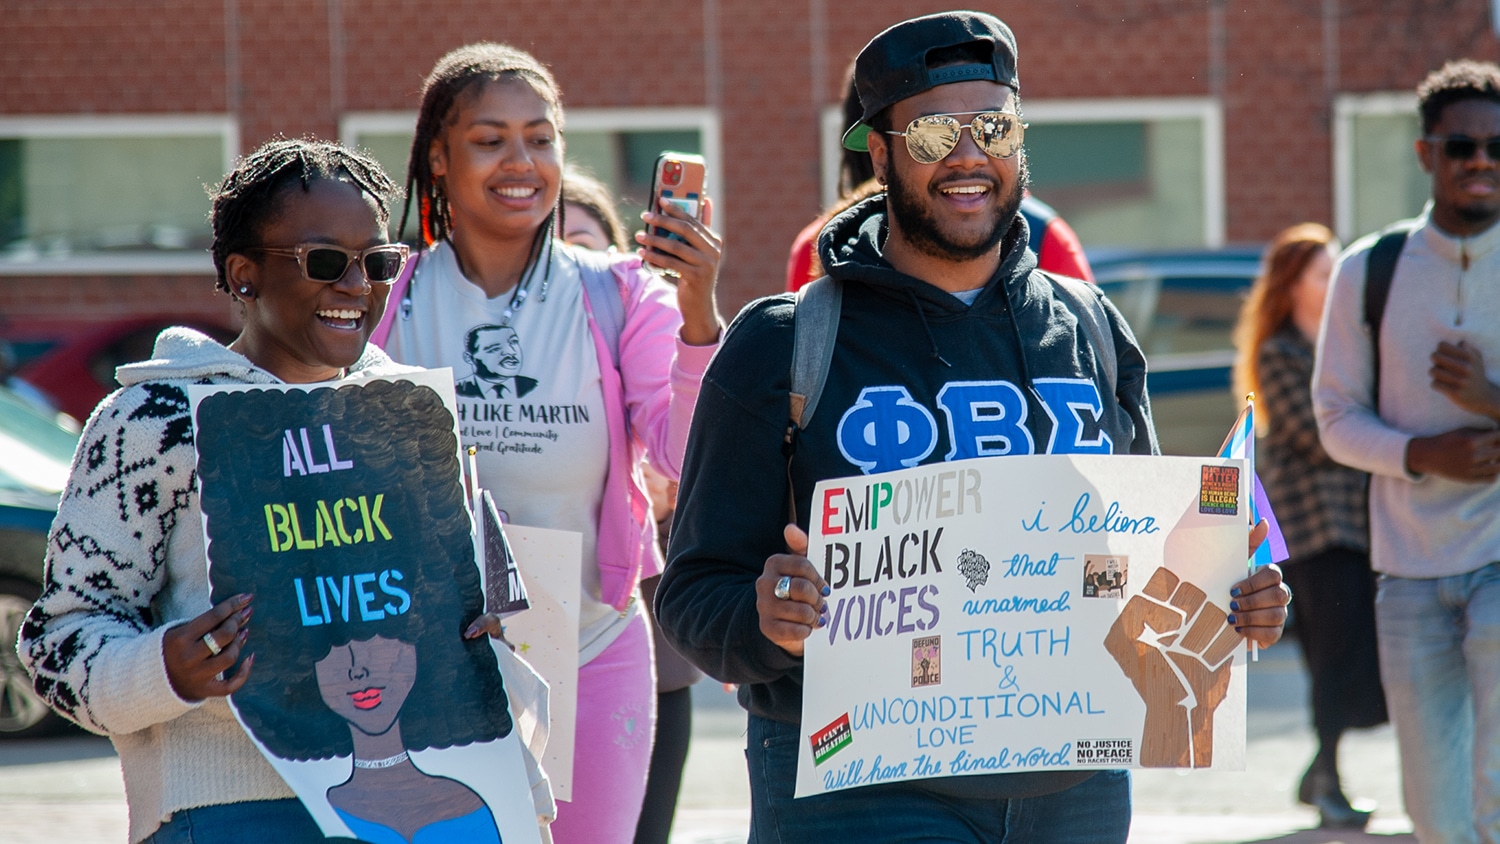 Three people hold handmade signs while walking at the "March Like Martin" event, commemorating Martin Luther King, Jr.